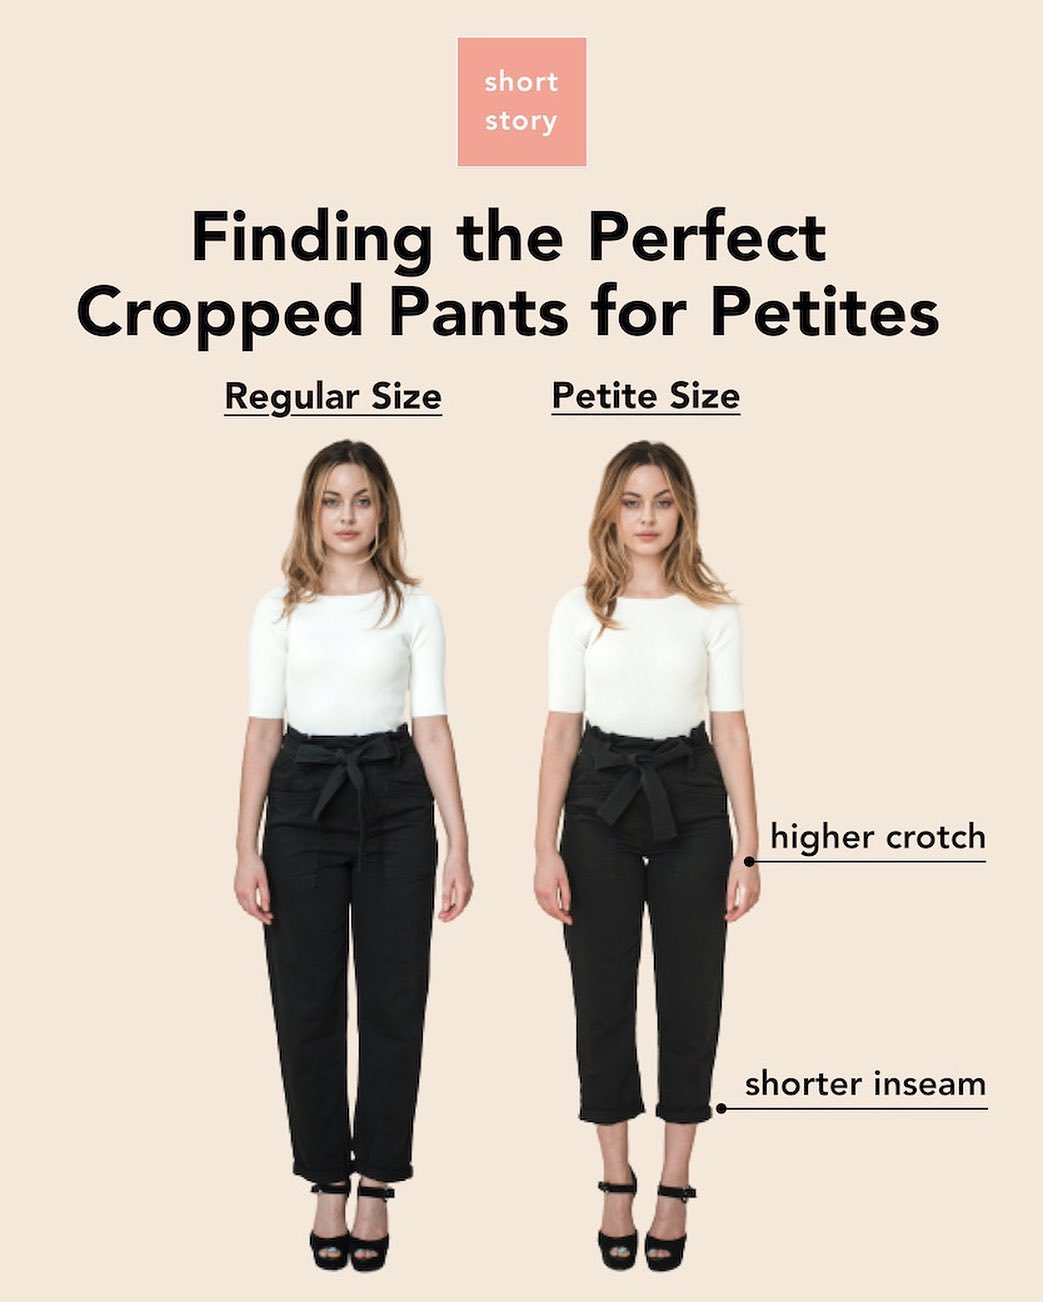 Embracing the Differences Between Regular and Petite Size Clothing